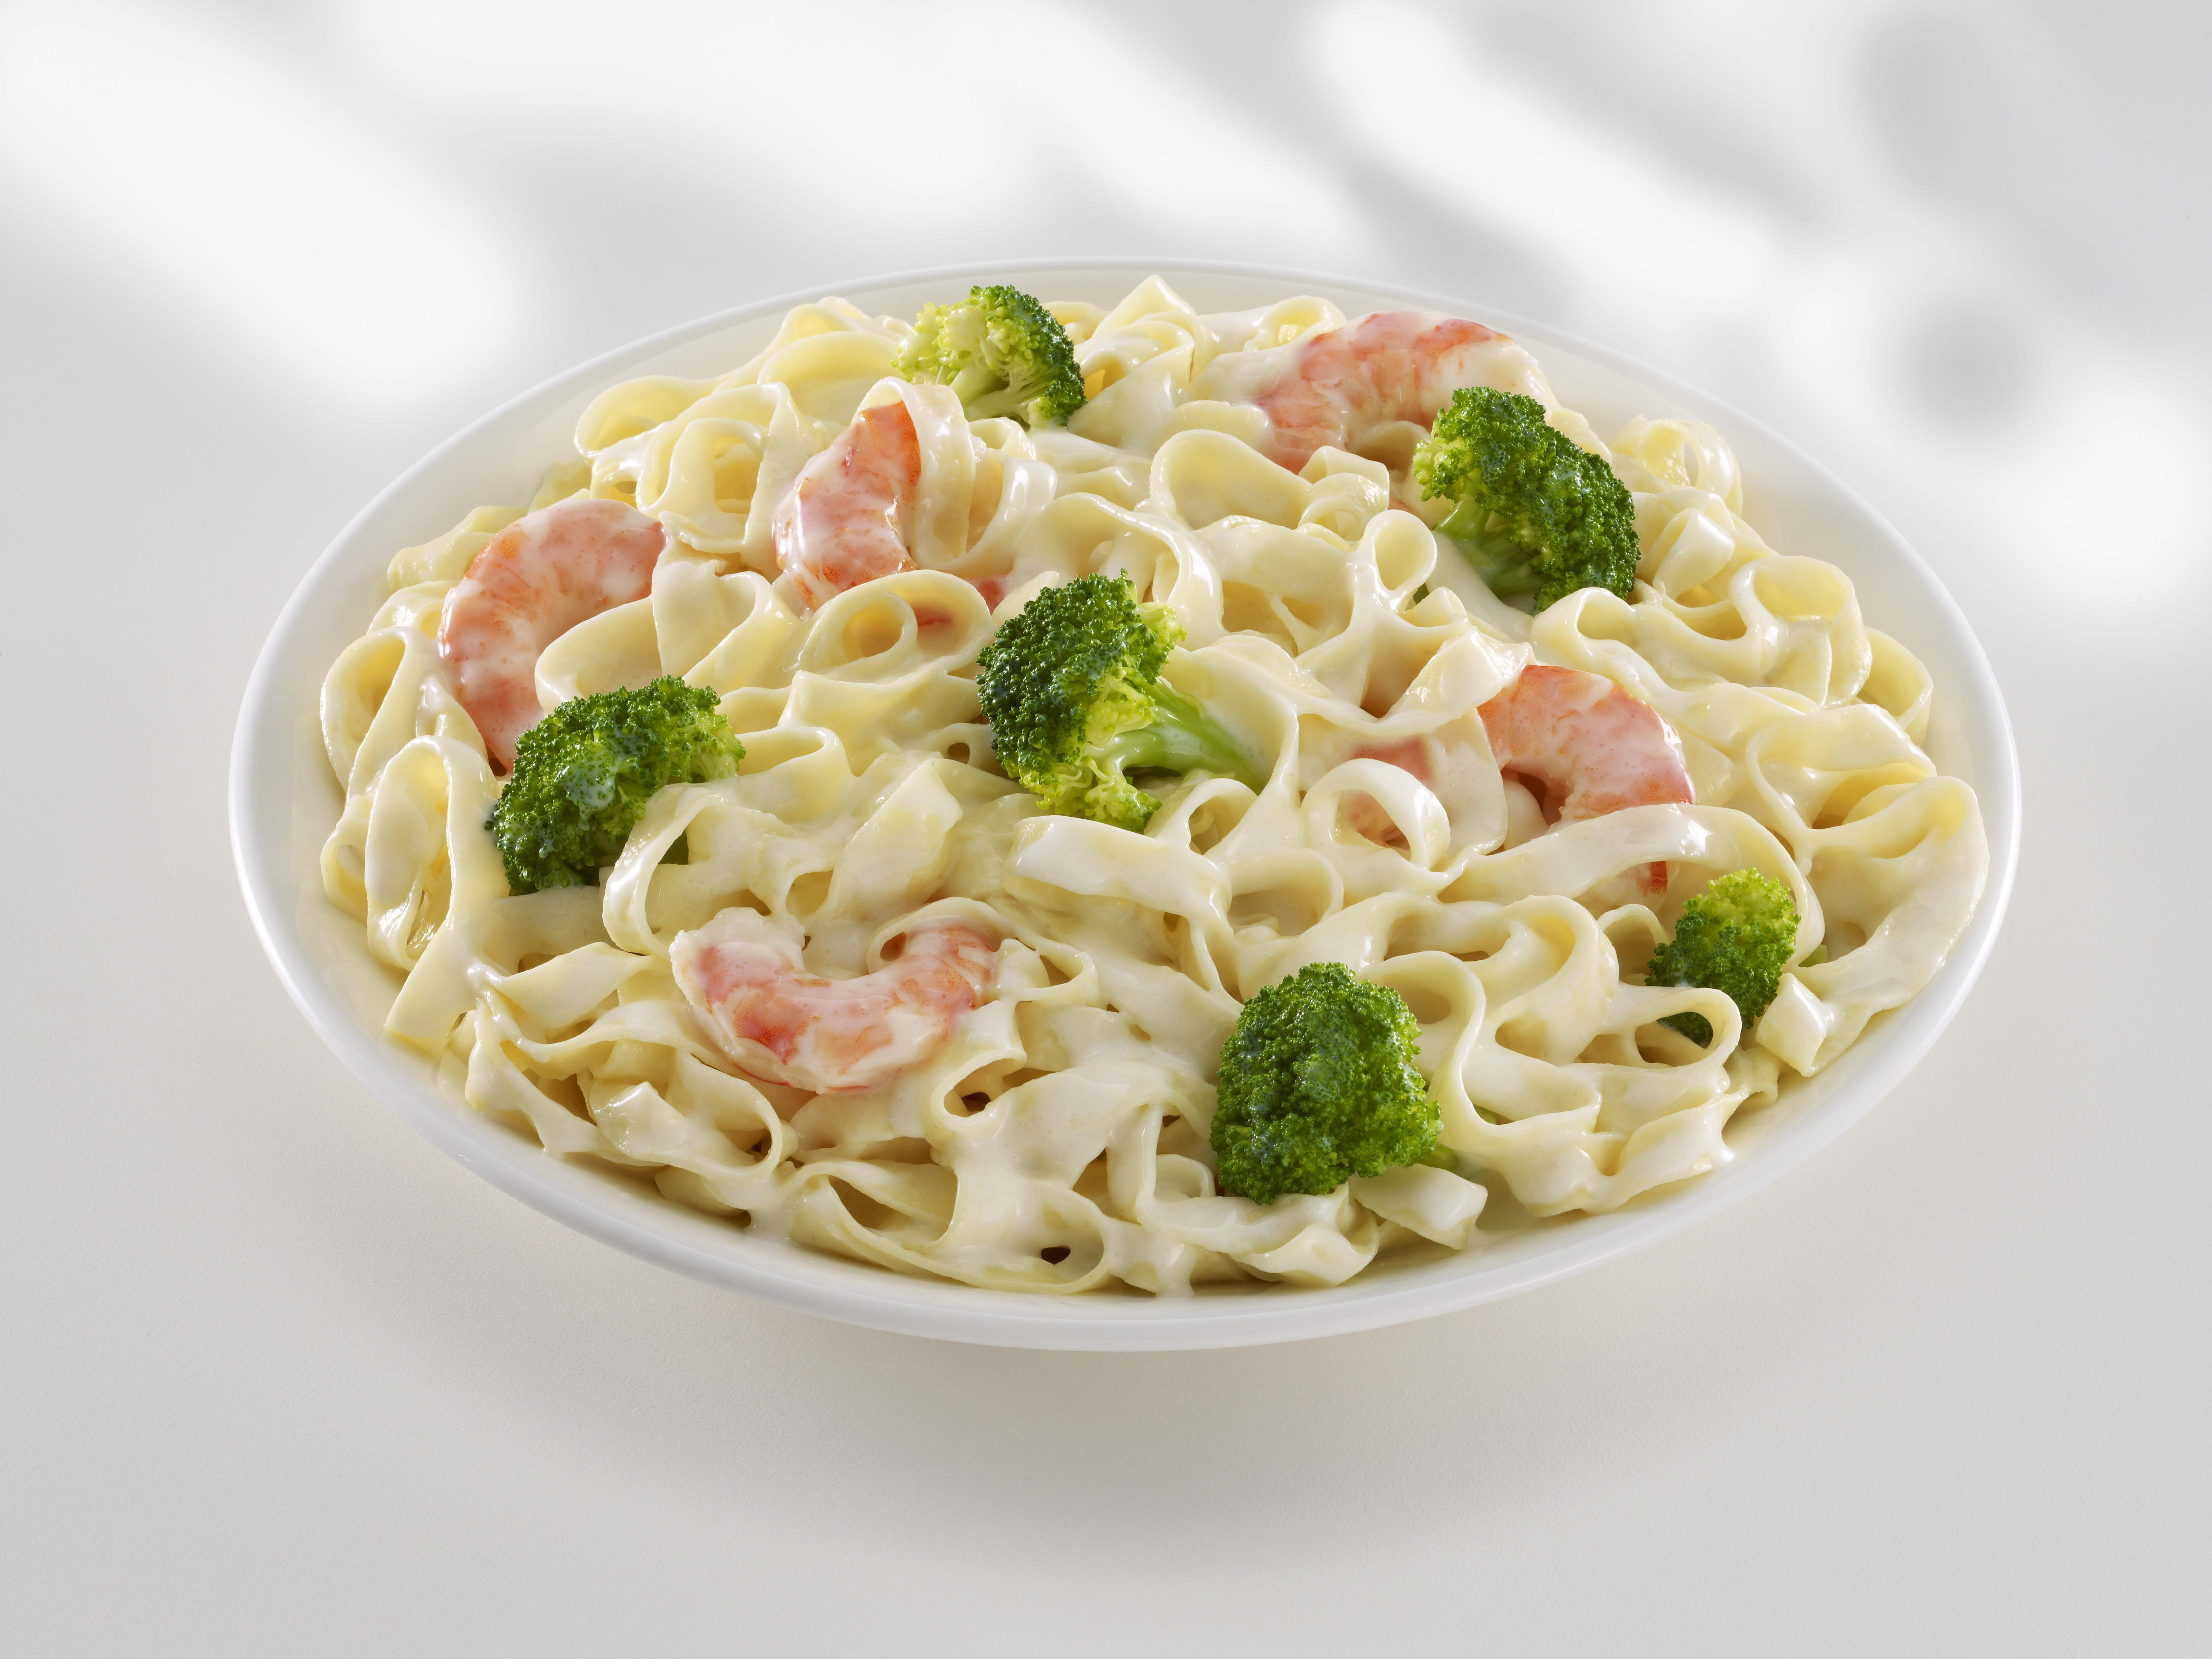 Shrimp And Broccoli Alfredo
 Foothill Farms Versatility is Delicious